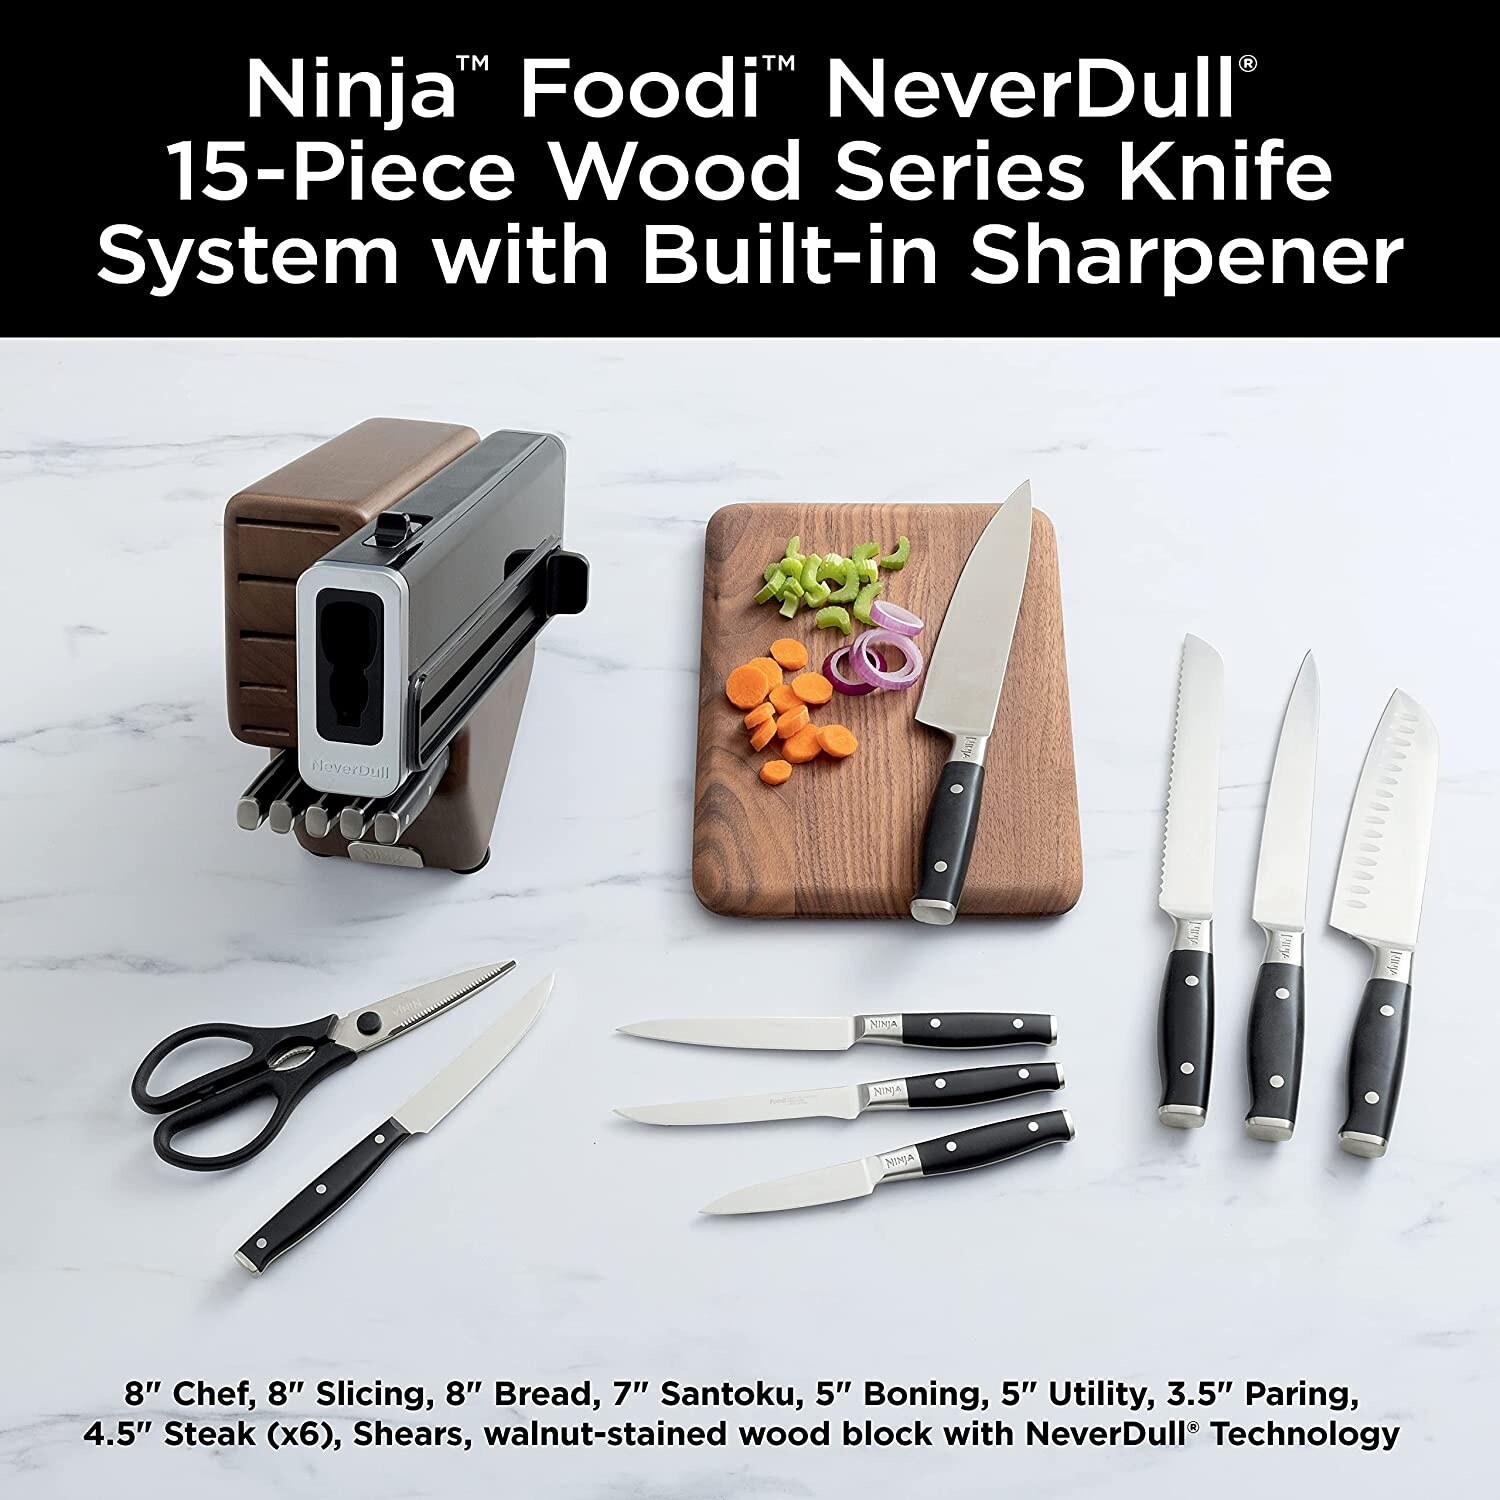 https://ak1.ostkcdn.com/images/products/is/images/direct/2f331cdb0f486e3533bcb210d7a53b7d26ca13a6/Ninja-K52015-Foodi-NeverDull-15-Piece-Premium-Knife-System.jpg